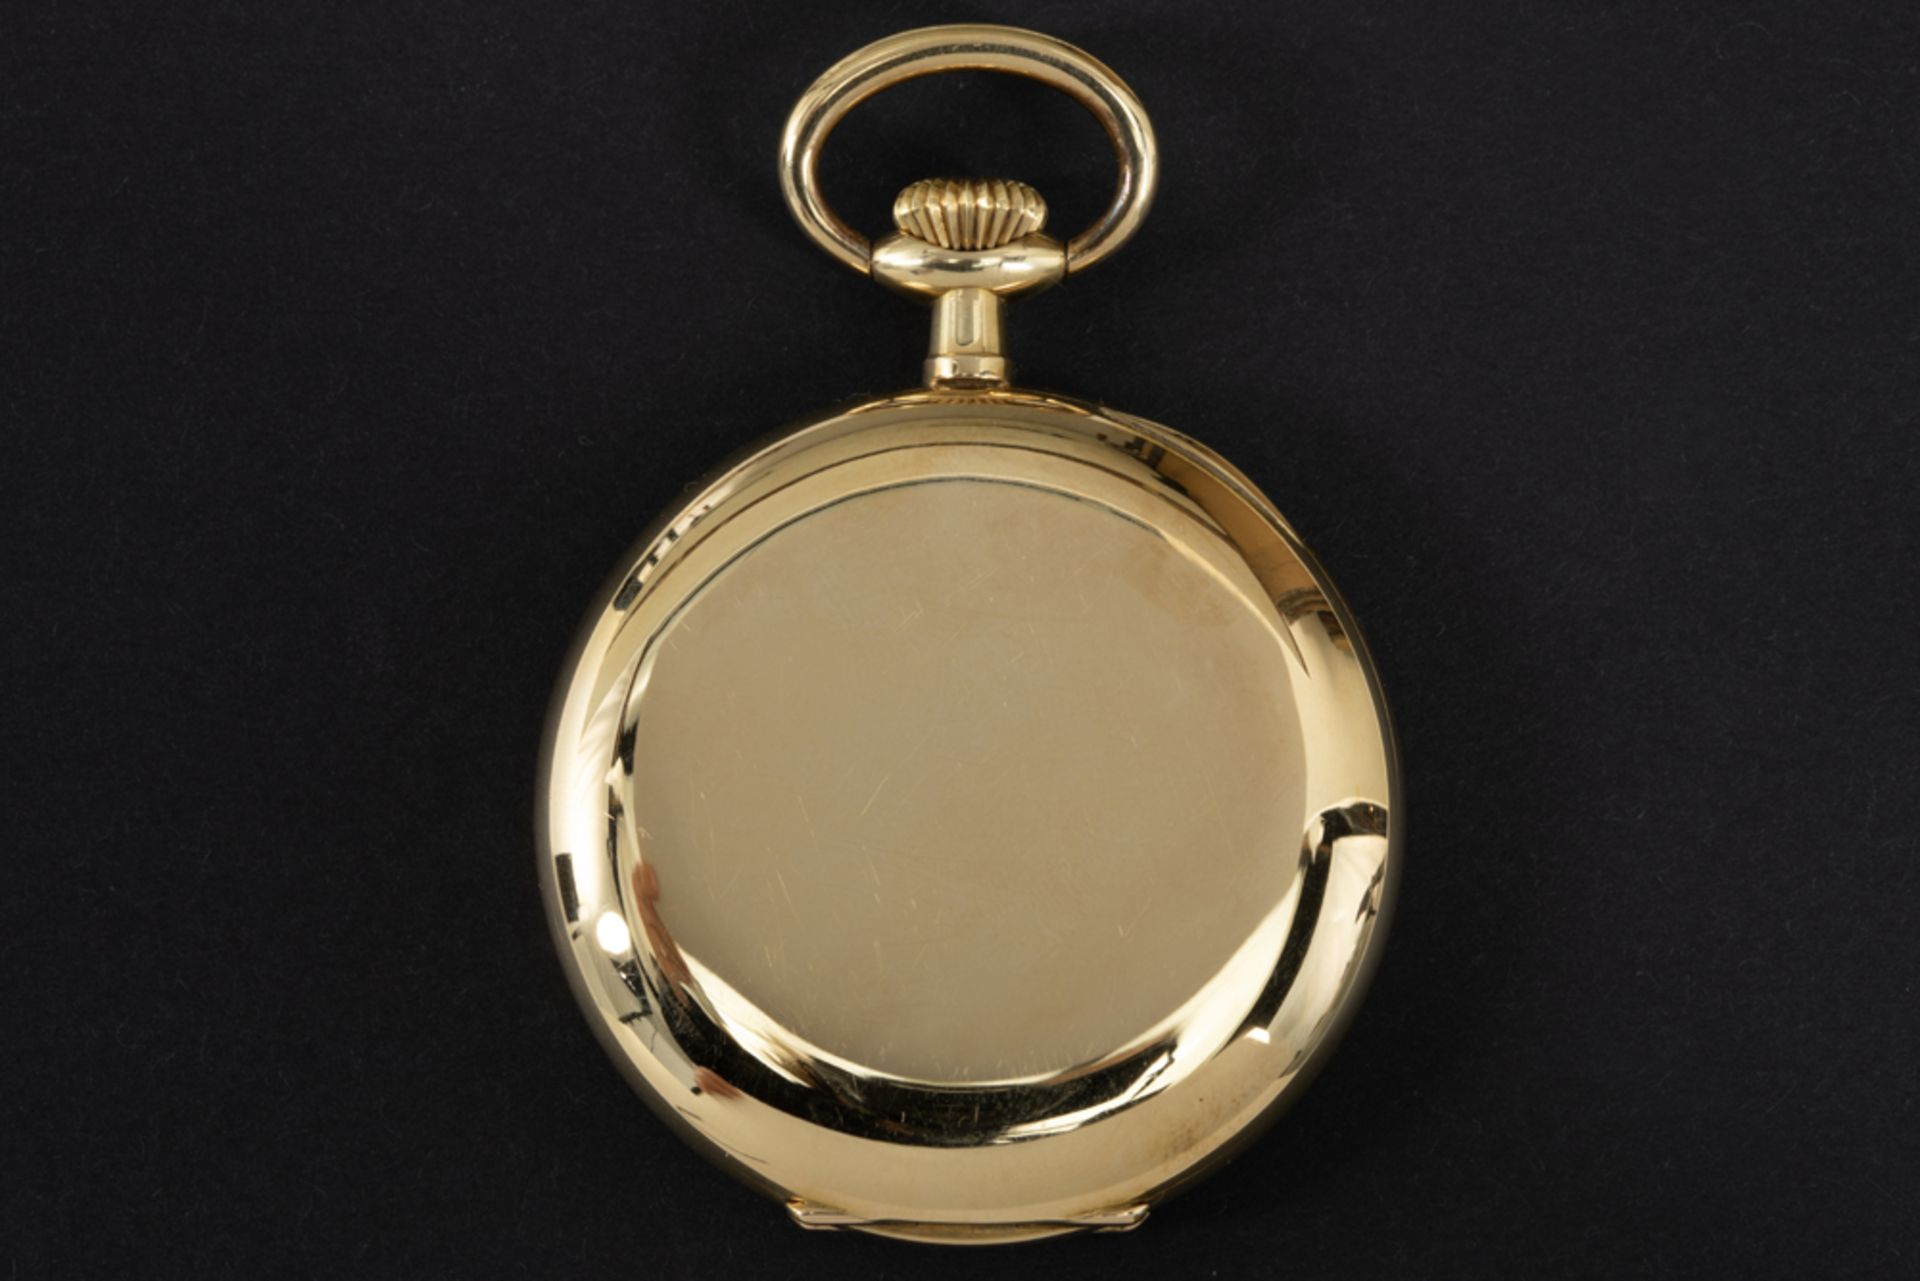 Chronomètre Croissant marked Art Deco pocket watch with its case in yellow gold (18 carat) || - Image 2 of 4